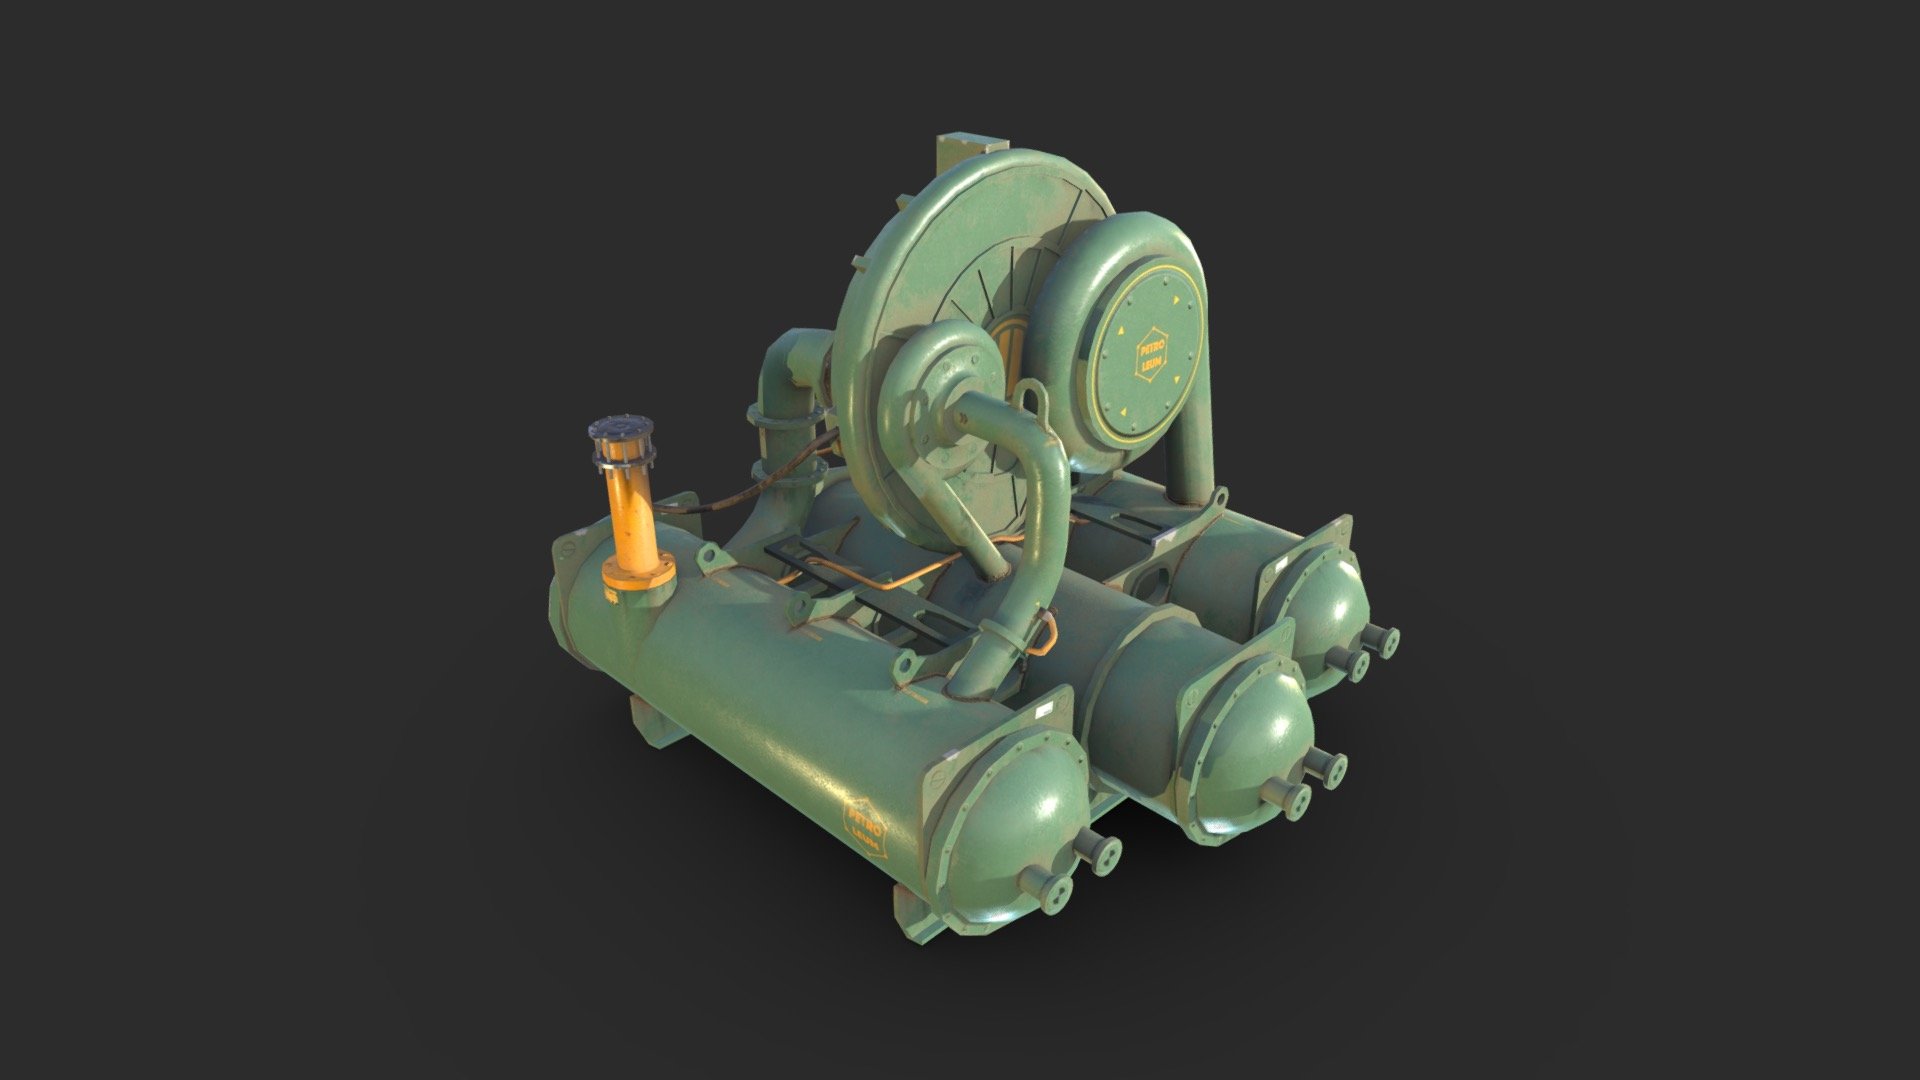 This industrial centrifugal air &amp; gas compressor including 4 LODs each to get the best optimization and the best quality. This petroleum industrial prop is used in gas treatment factory and in any chemical installations.

This AAA game assets of industrial compressor will embellish you scene and add more details which can help the gameplay and the game-design.

The material of models is unique and ready for PBR.

Low-poly model &amp; Blender native 2.90

SPECIFICATIONS




Objects : 1

Polygons : 6333

Subdivision ready : No

Render engine : Eevee (Cycles ready)

GAME SPECS




LODs : Yes (inside FBX for Unity &amp; Unreal)

Numbers of LODs : 4

Collider : No

Lightmap UV : Yes

EXPORTED FORMATS




FBX

Collada

OBJ

TEXTURES




Materials in scene : 1

Textures sizes : 4K

Textures types : Base Color, Metallic, Roughness, Normal (DirectX &amp; OpenGL), Heigh, AO

Textures format : PNG

GENERAL




Real scale : Yes

Scene objects are organized by groups
 - Industrial Compressor - Buy Royalty Free 3D model by KangaroOz 3D (@KangaroOz-3D) 3d model